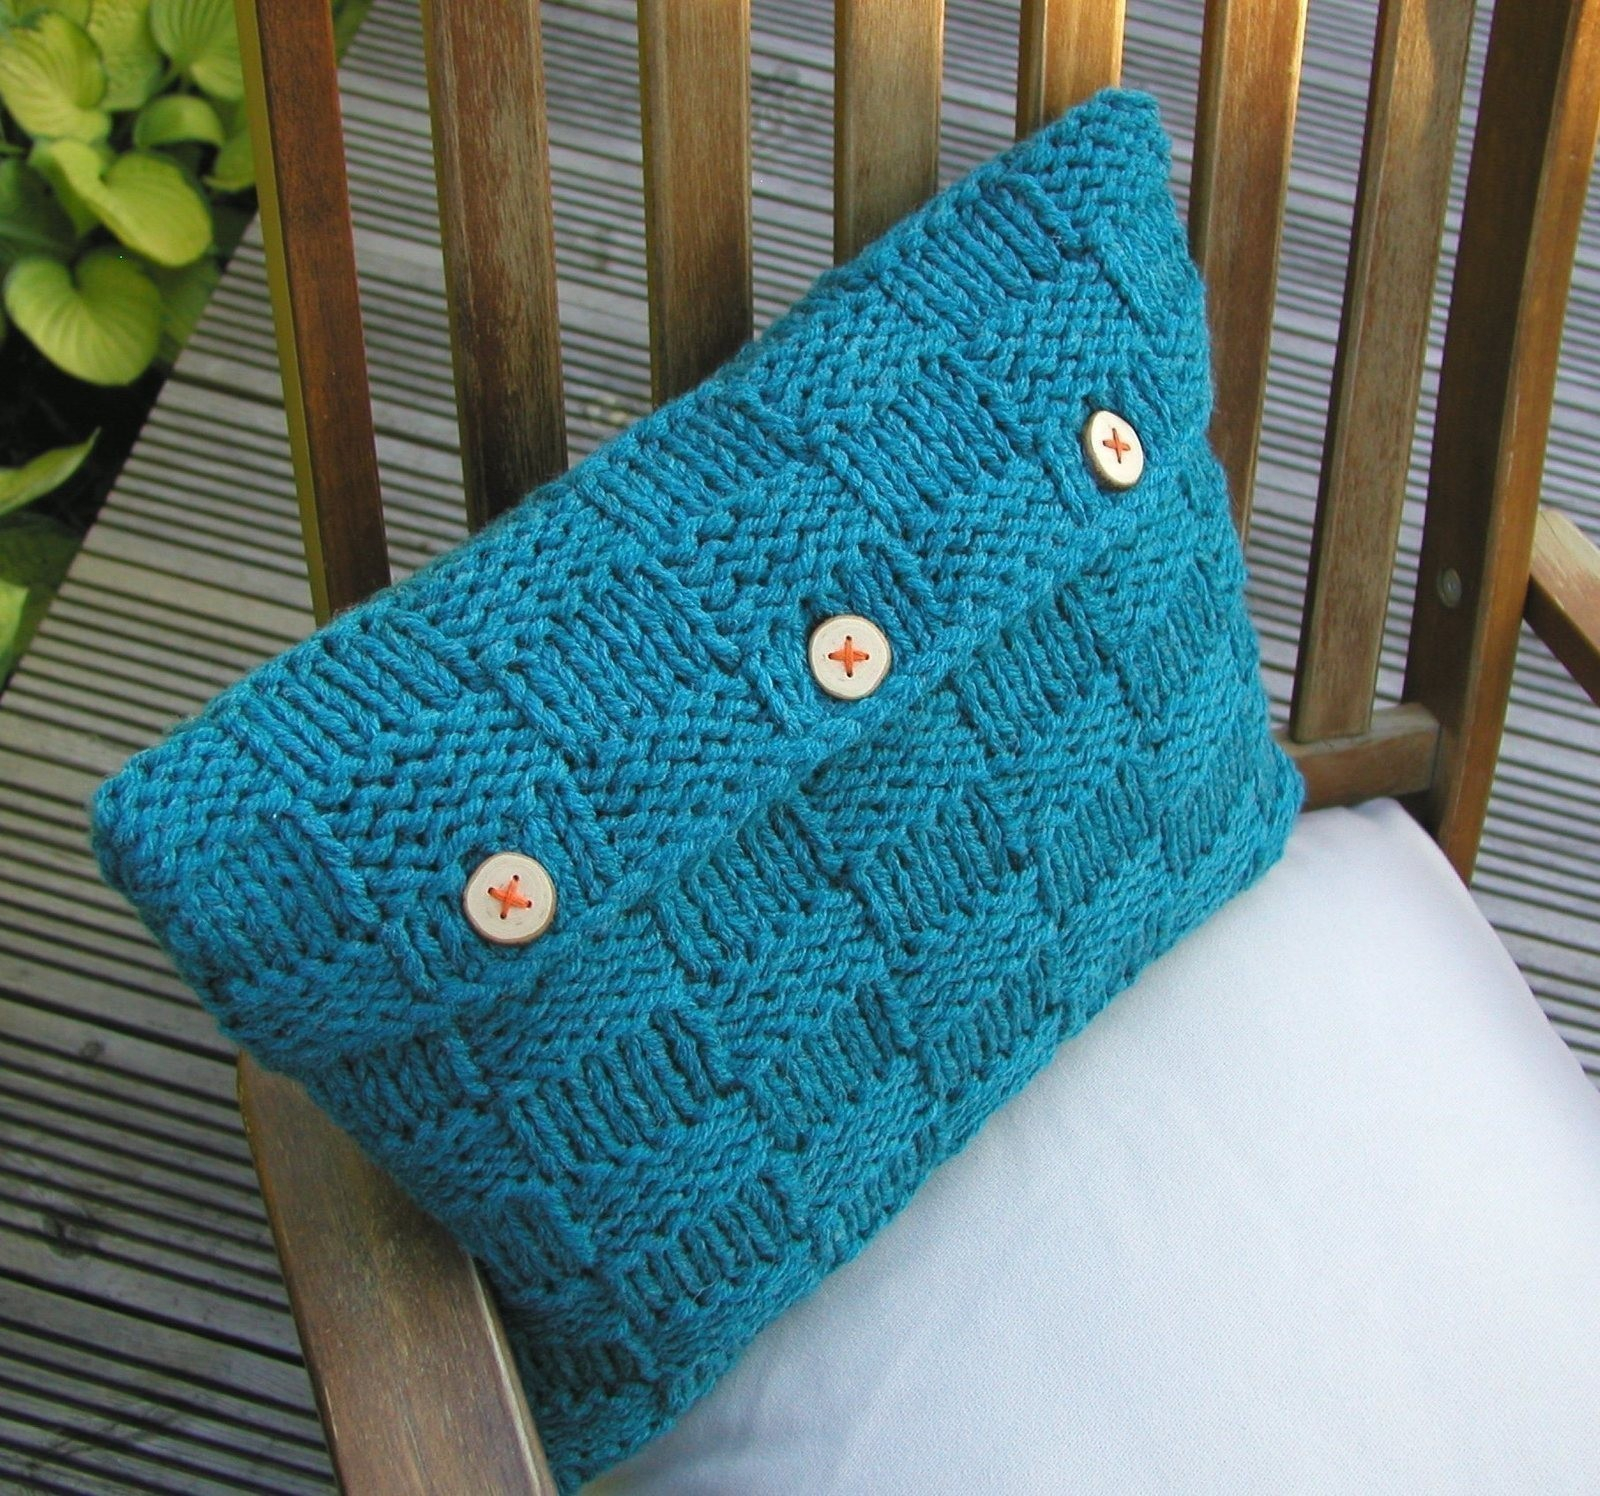 Free Cushion Knitting Patterns Checkerboard Cushion Cover How To Stitch A Knit Or Crochet Cushion